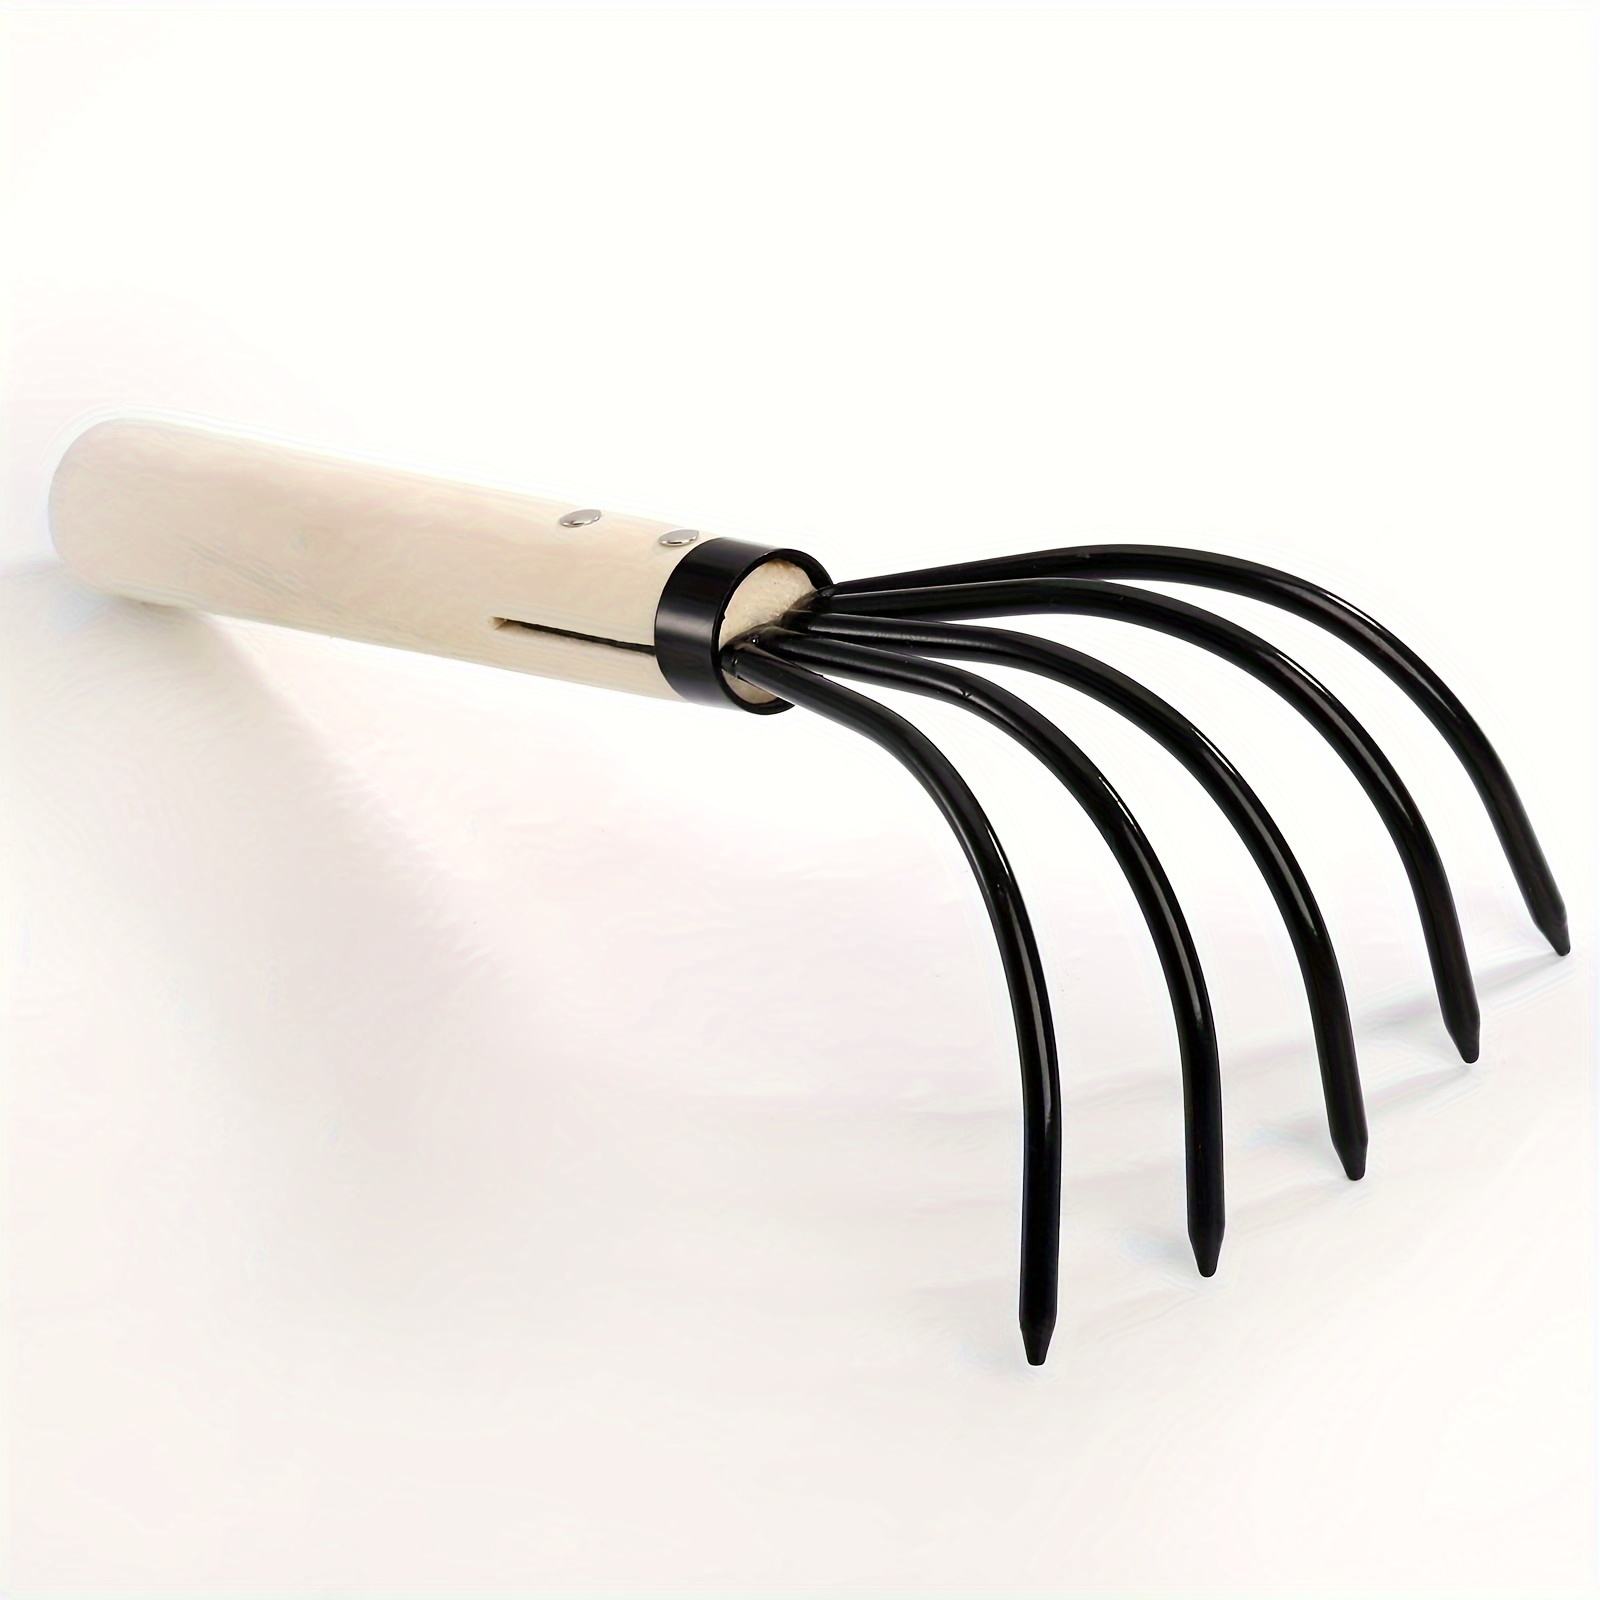 

1pc, All-purpose Claw Rake With 24cm Wooden Handle, 11cm Sturdy Tines, Efficient Soil Loosening And Seaweed Collection Tool